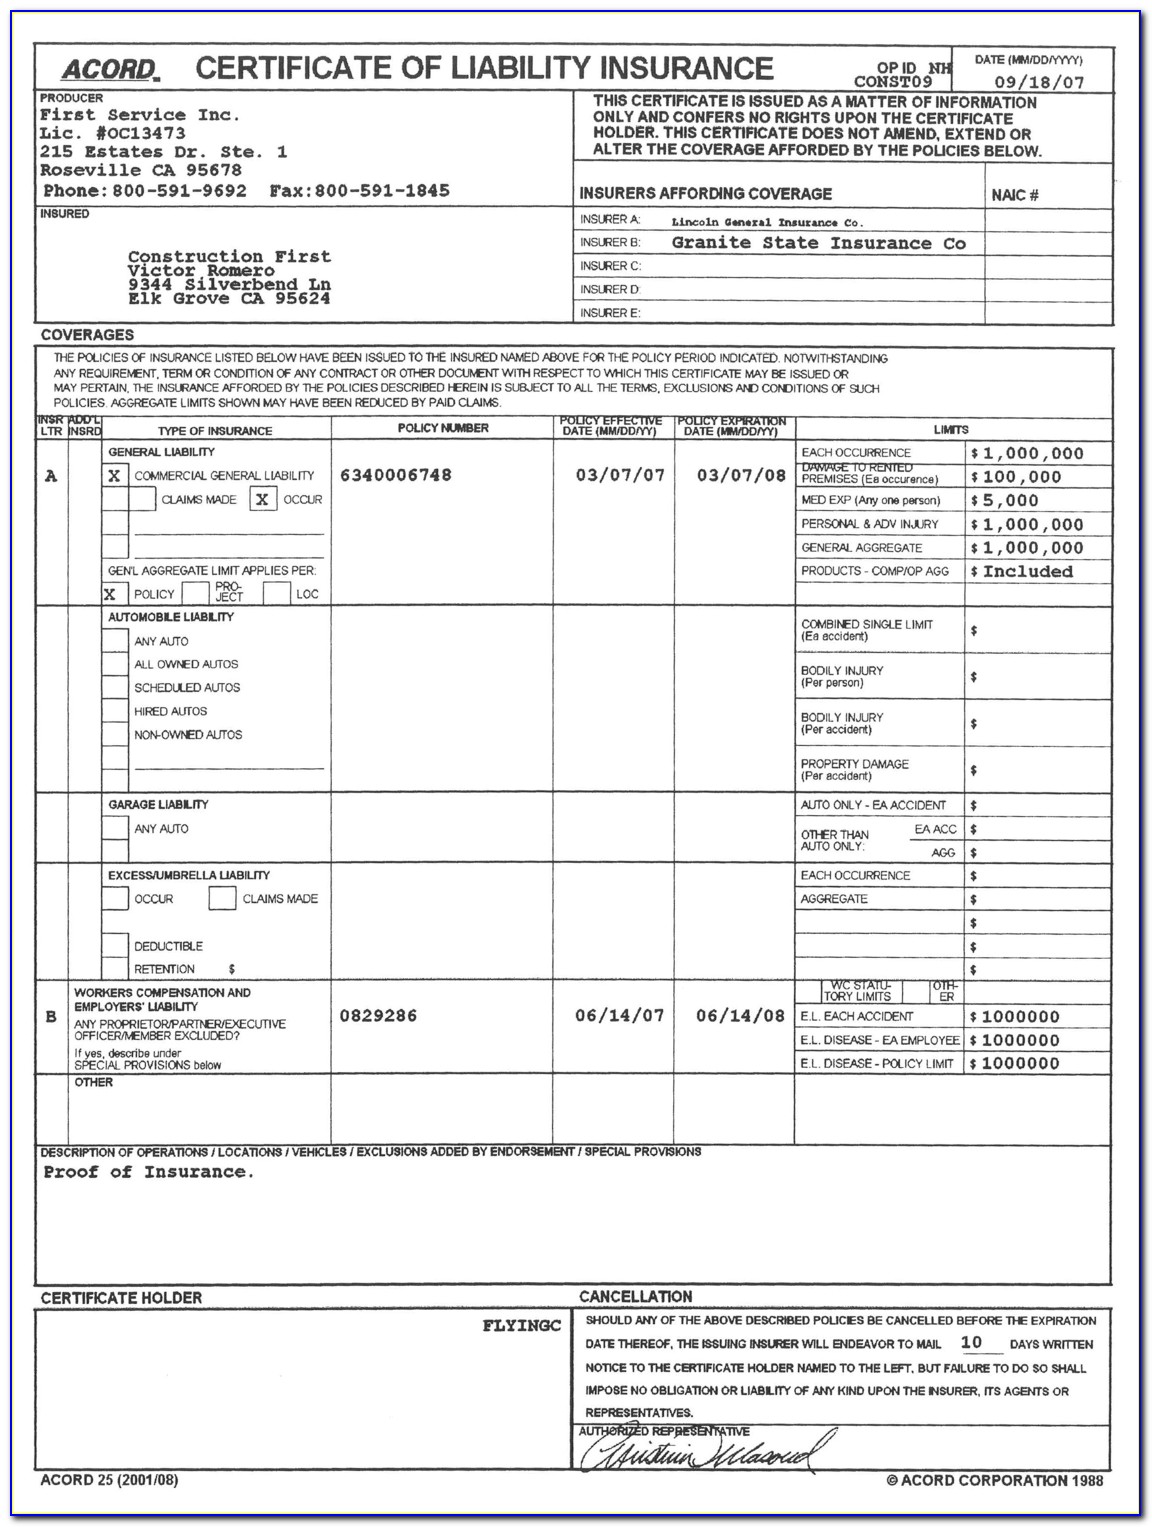 Acord Certificate Of Insurance Sample Form